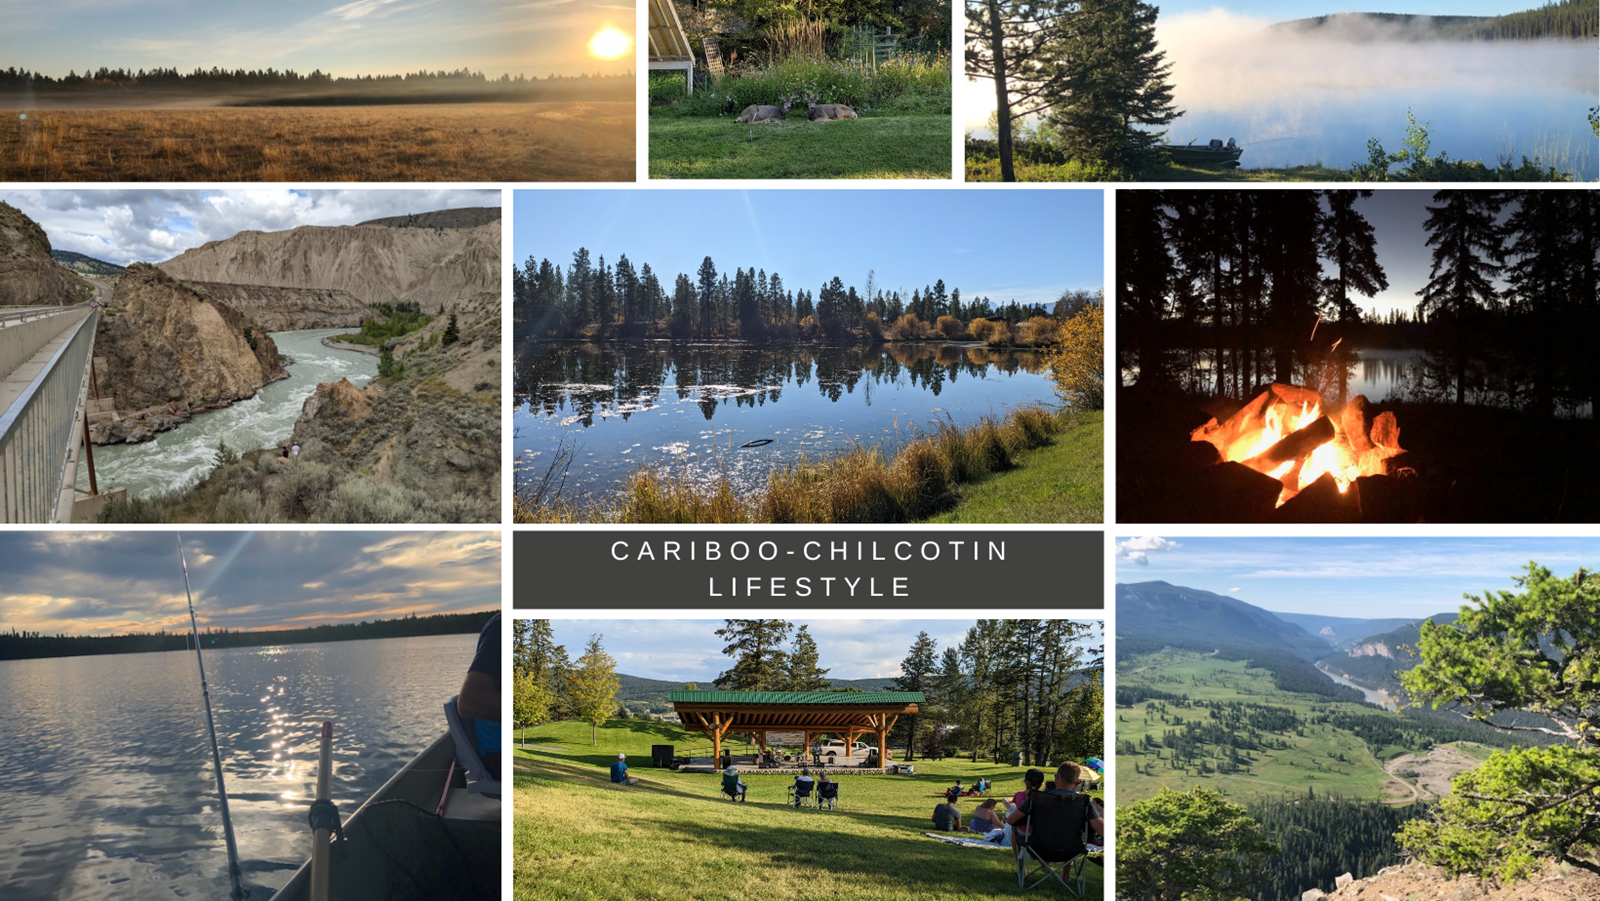 Cariboo-Chilcotin%20Lifestyle%20(Facebook%20Cover).png